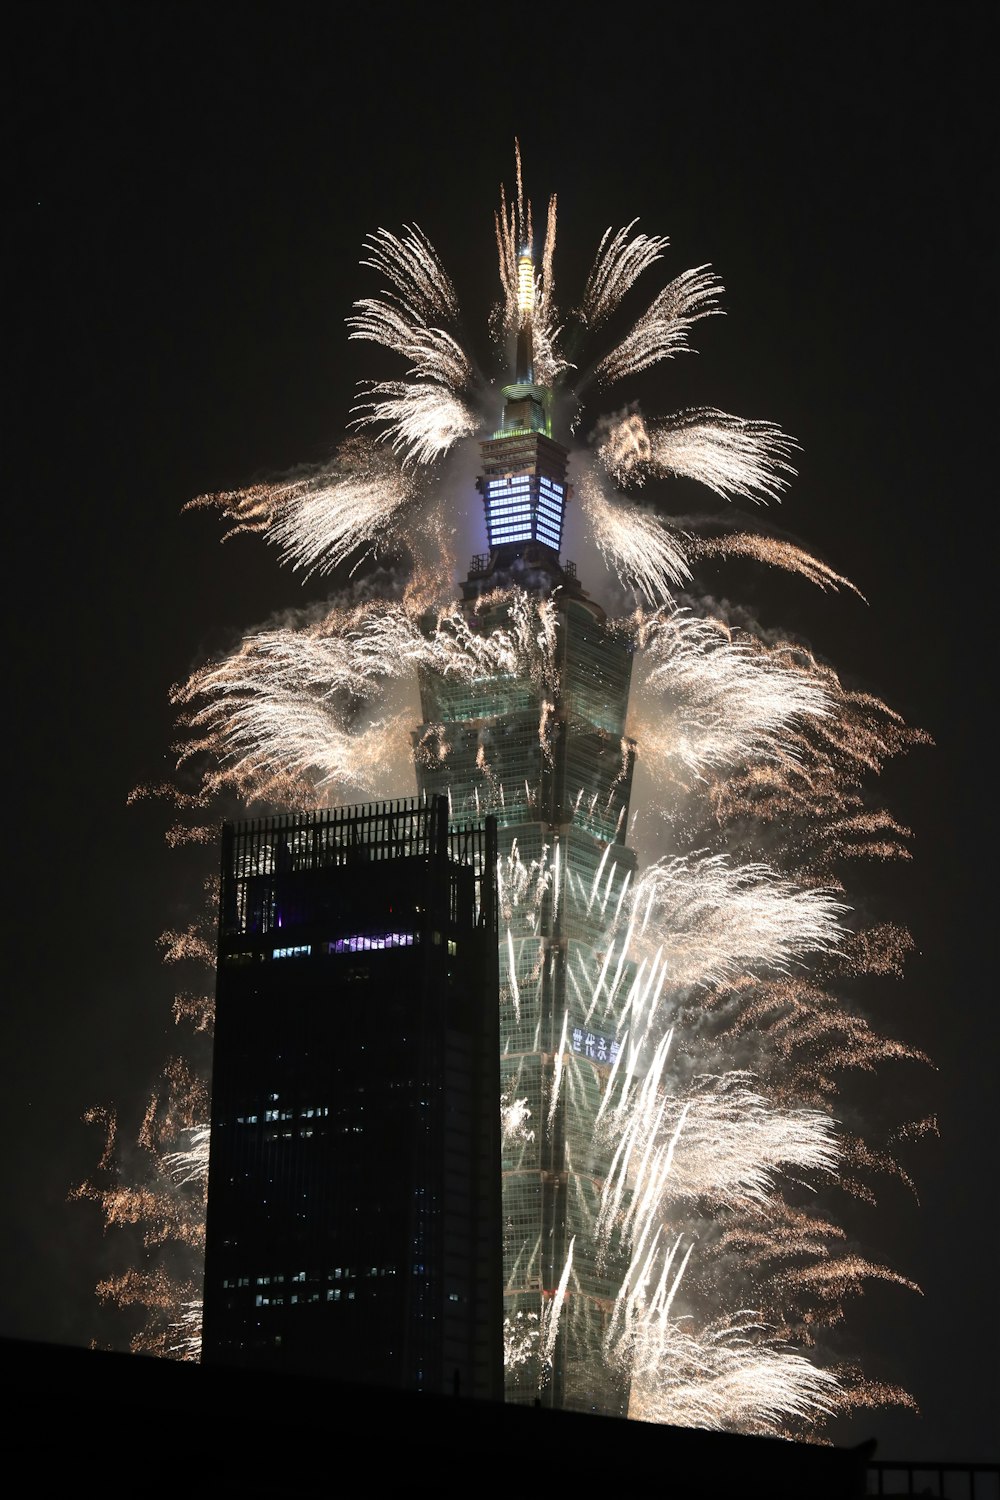 fireworks are lit up in the sky above a tall building